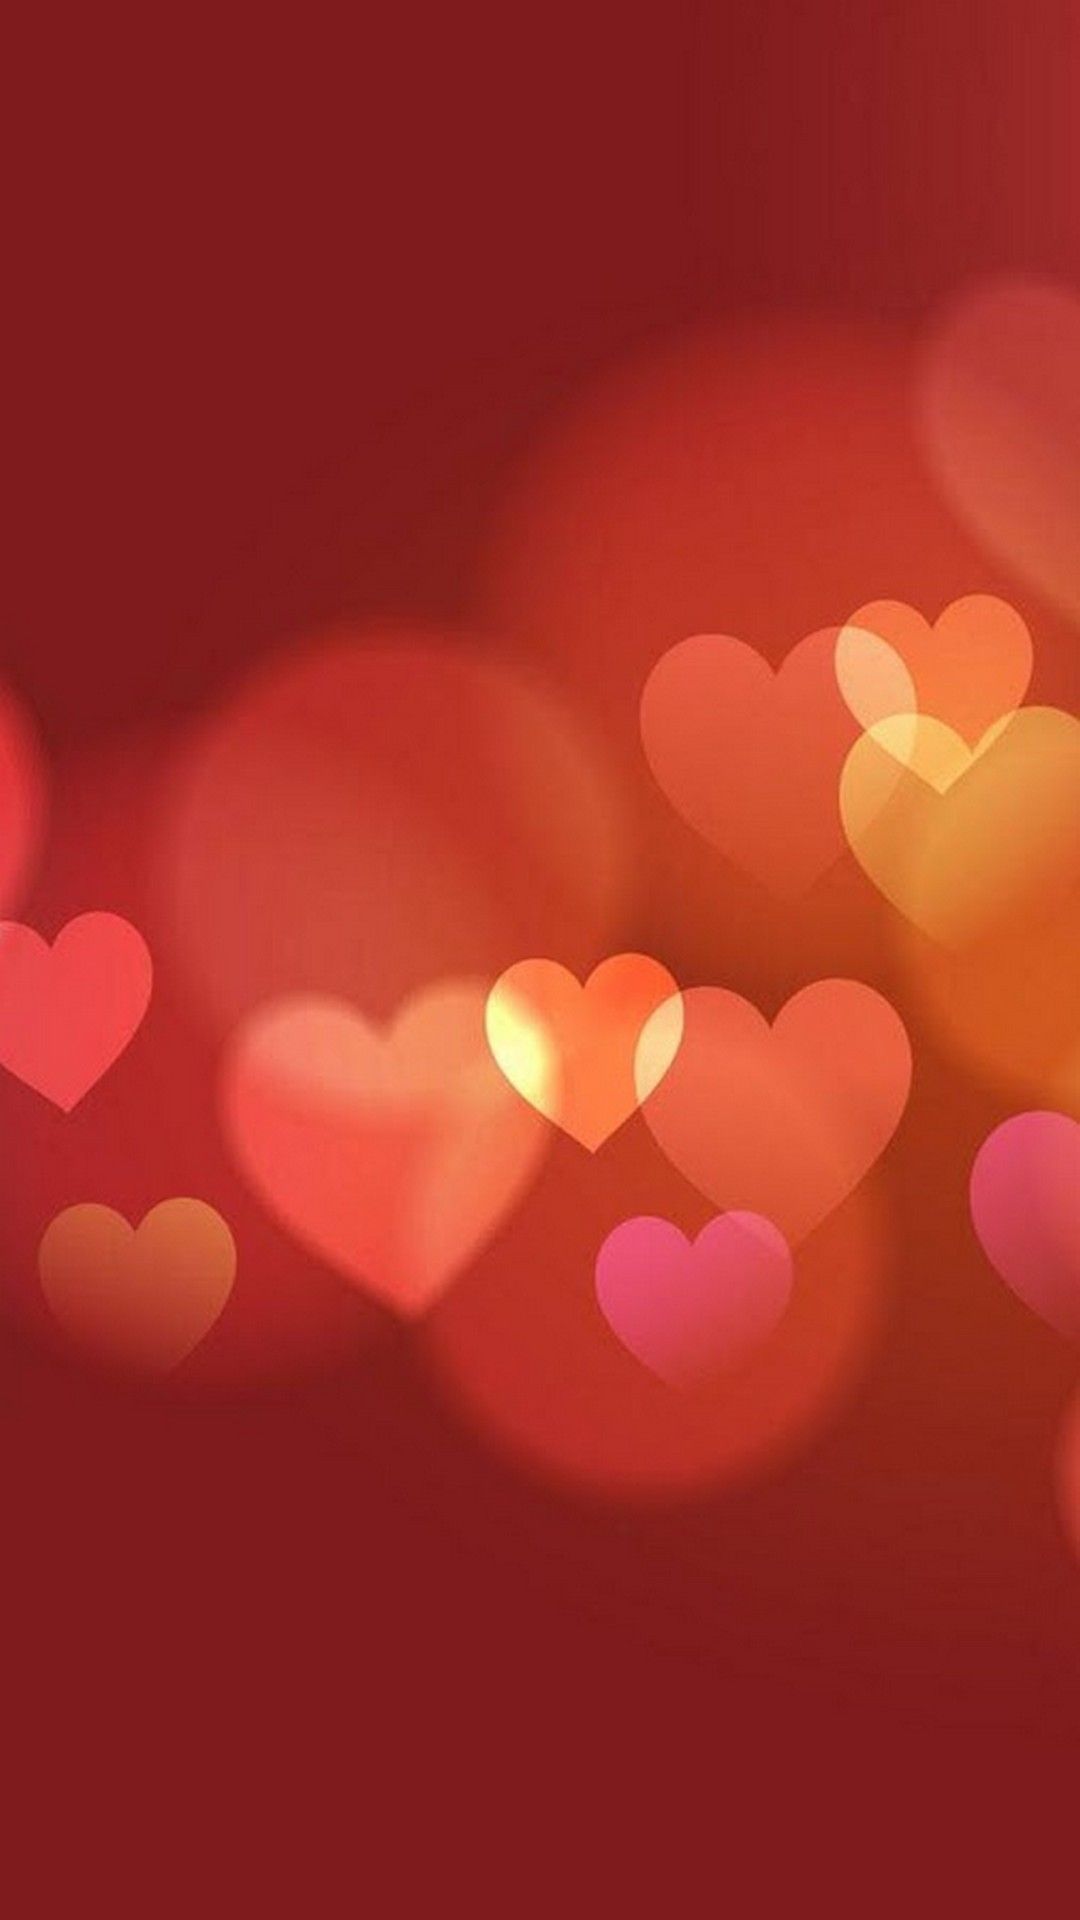 Cute valentines day backgrounds